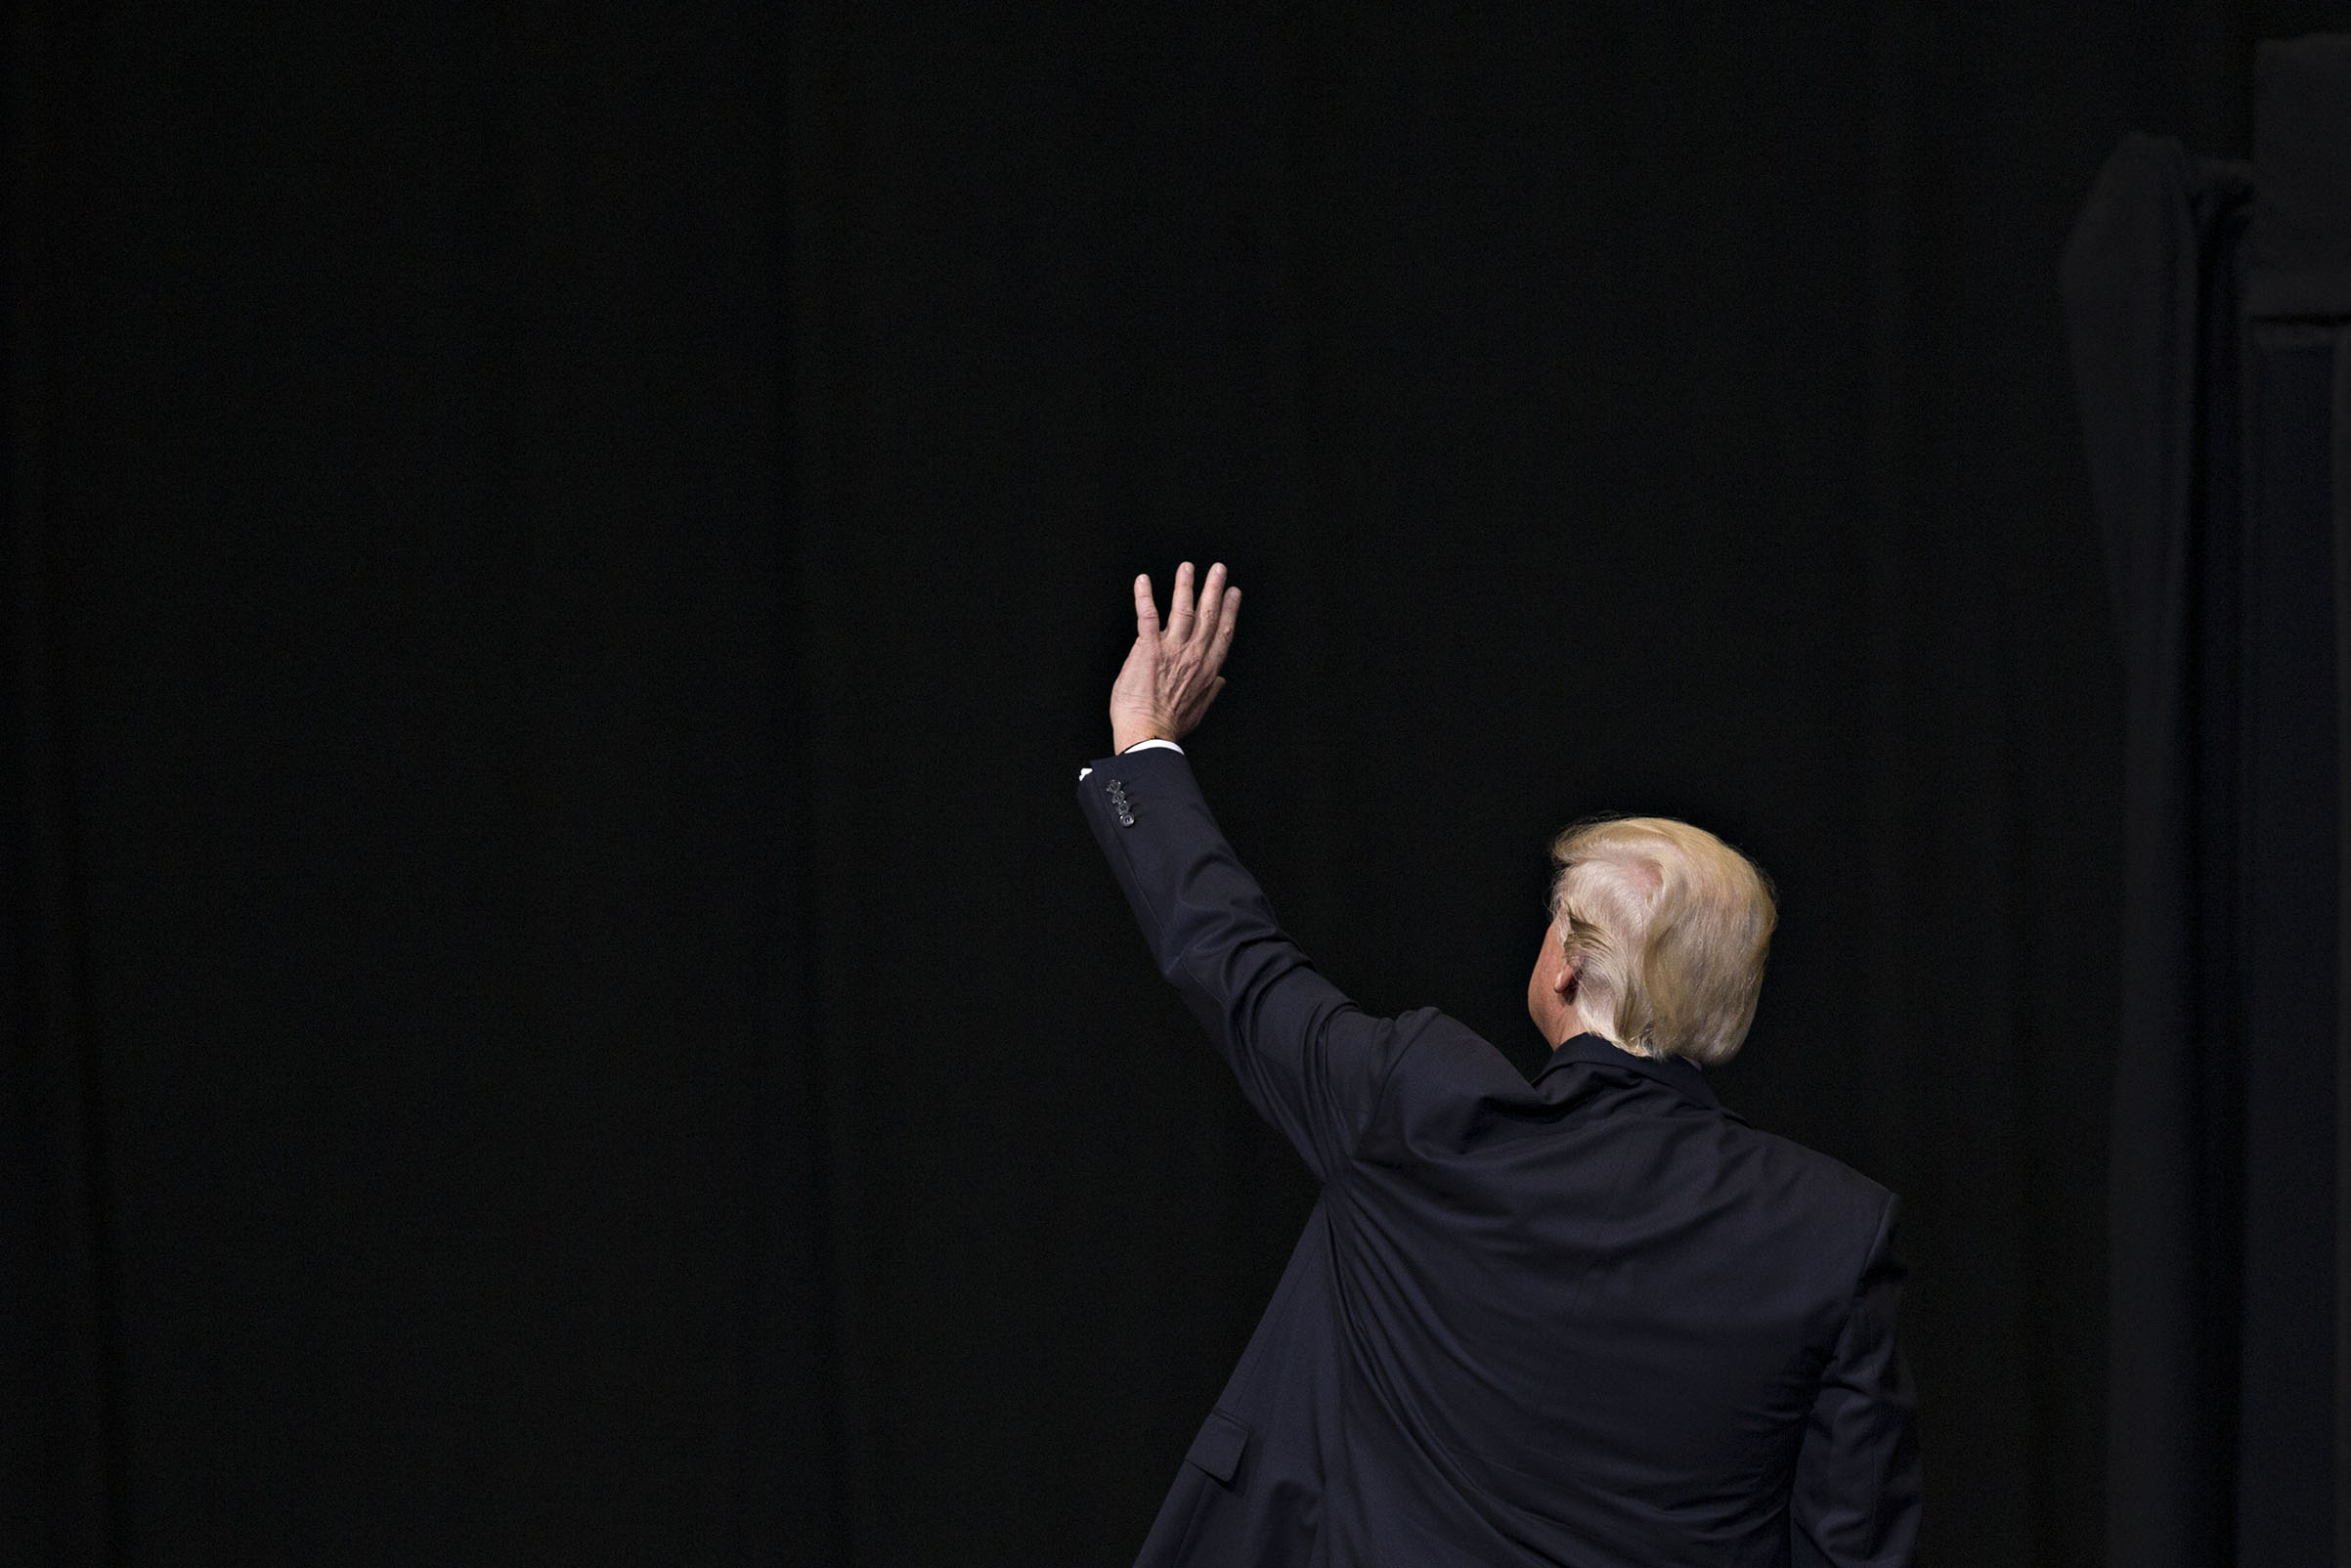 President Donald Trump waves as he leaves after speaking during a rally in Cedar Rapids, Iowa, on June 21, 2017. (Daniel Acker—Bloomberg/Getty Images)